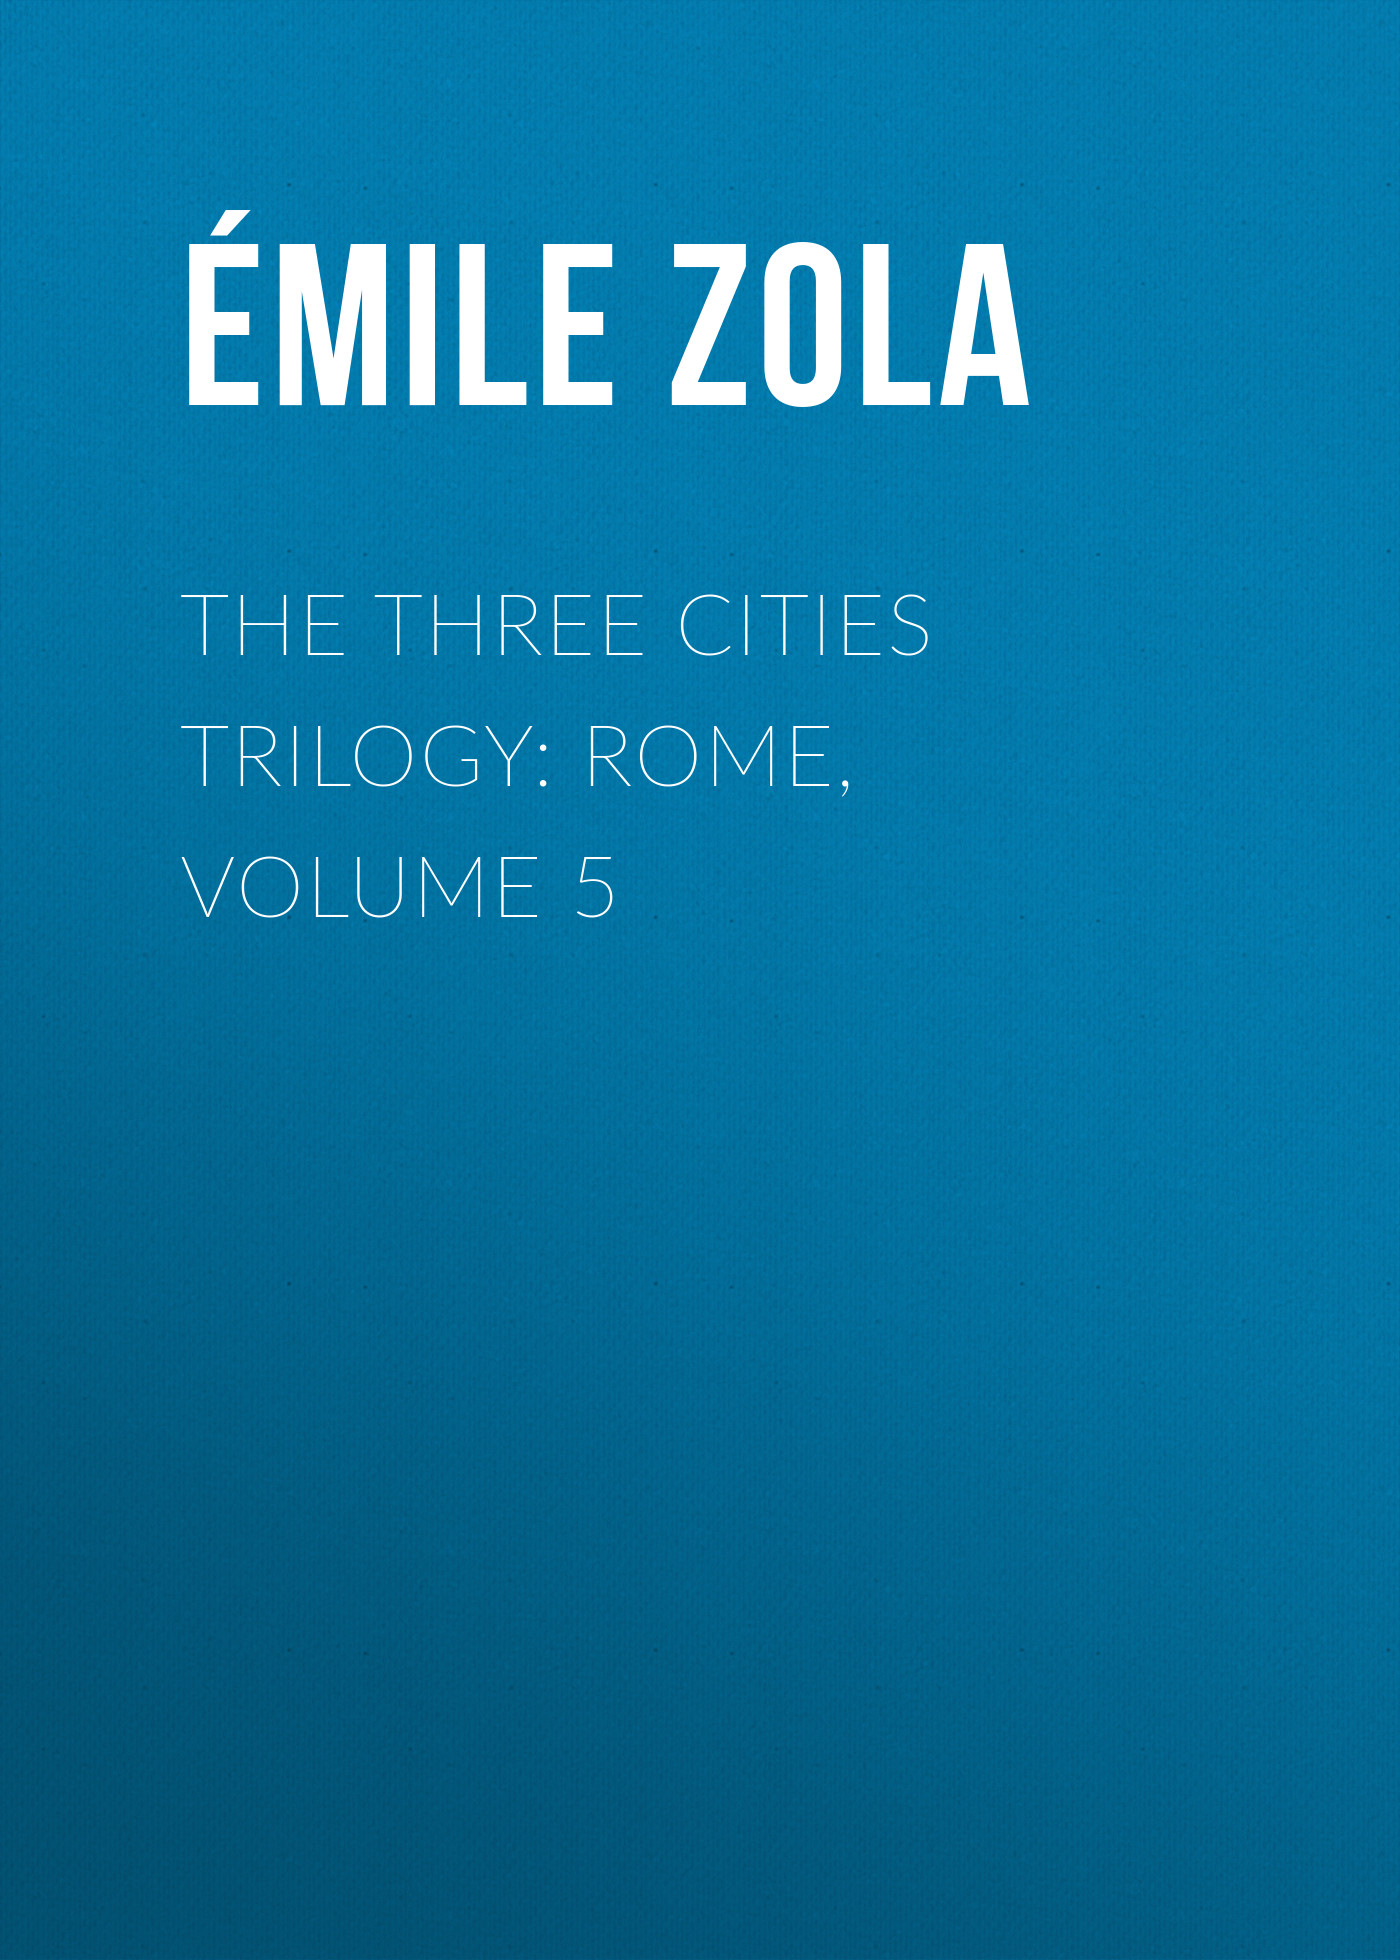 The Three Cities Trilogy: Rome, Volume 5